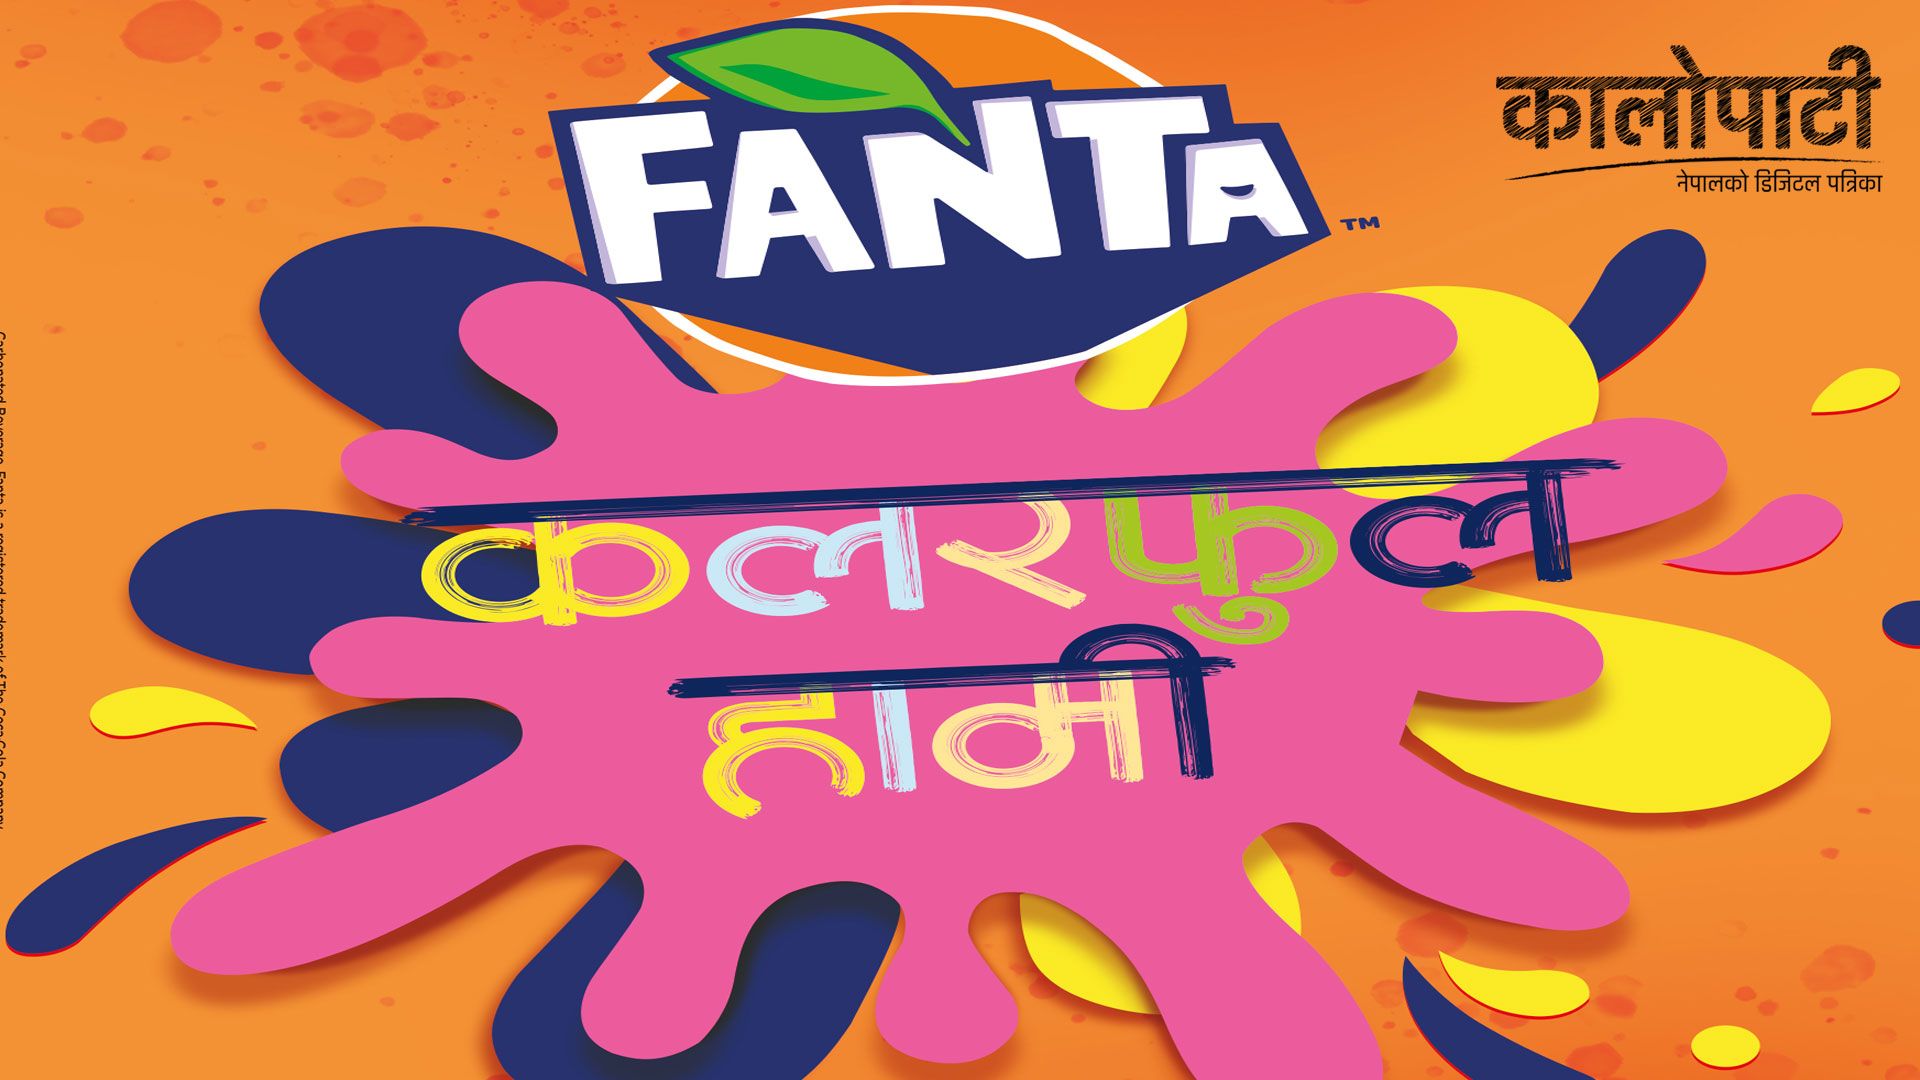 Fanta embraces the colors of fun with new campaign ‘Colorful Hami’